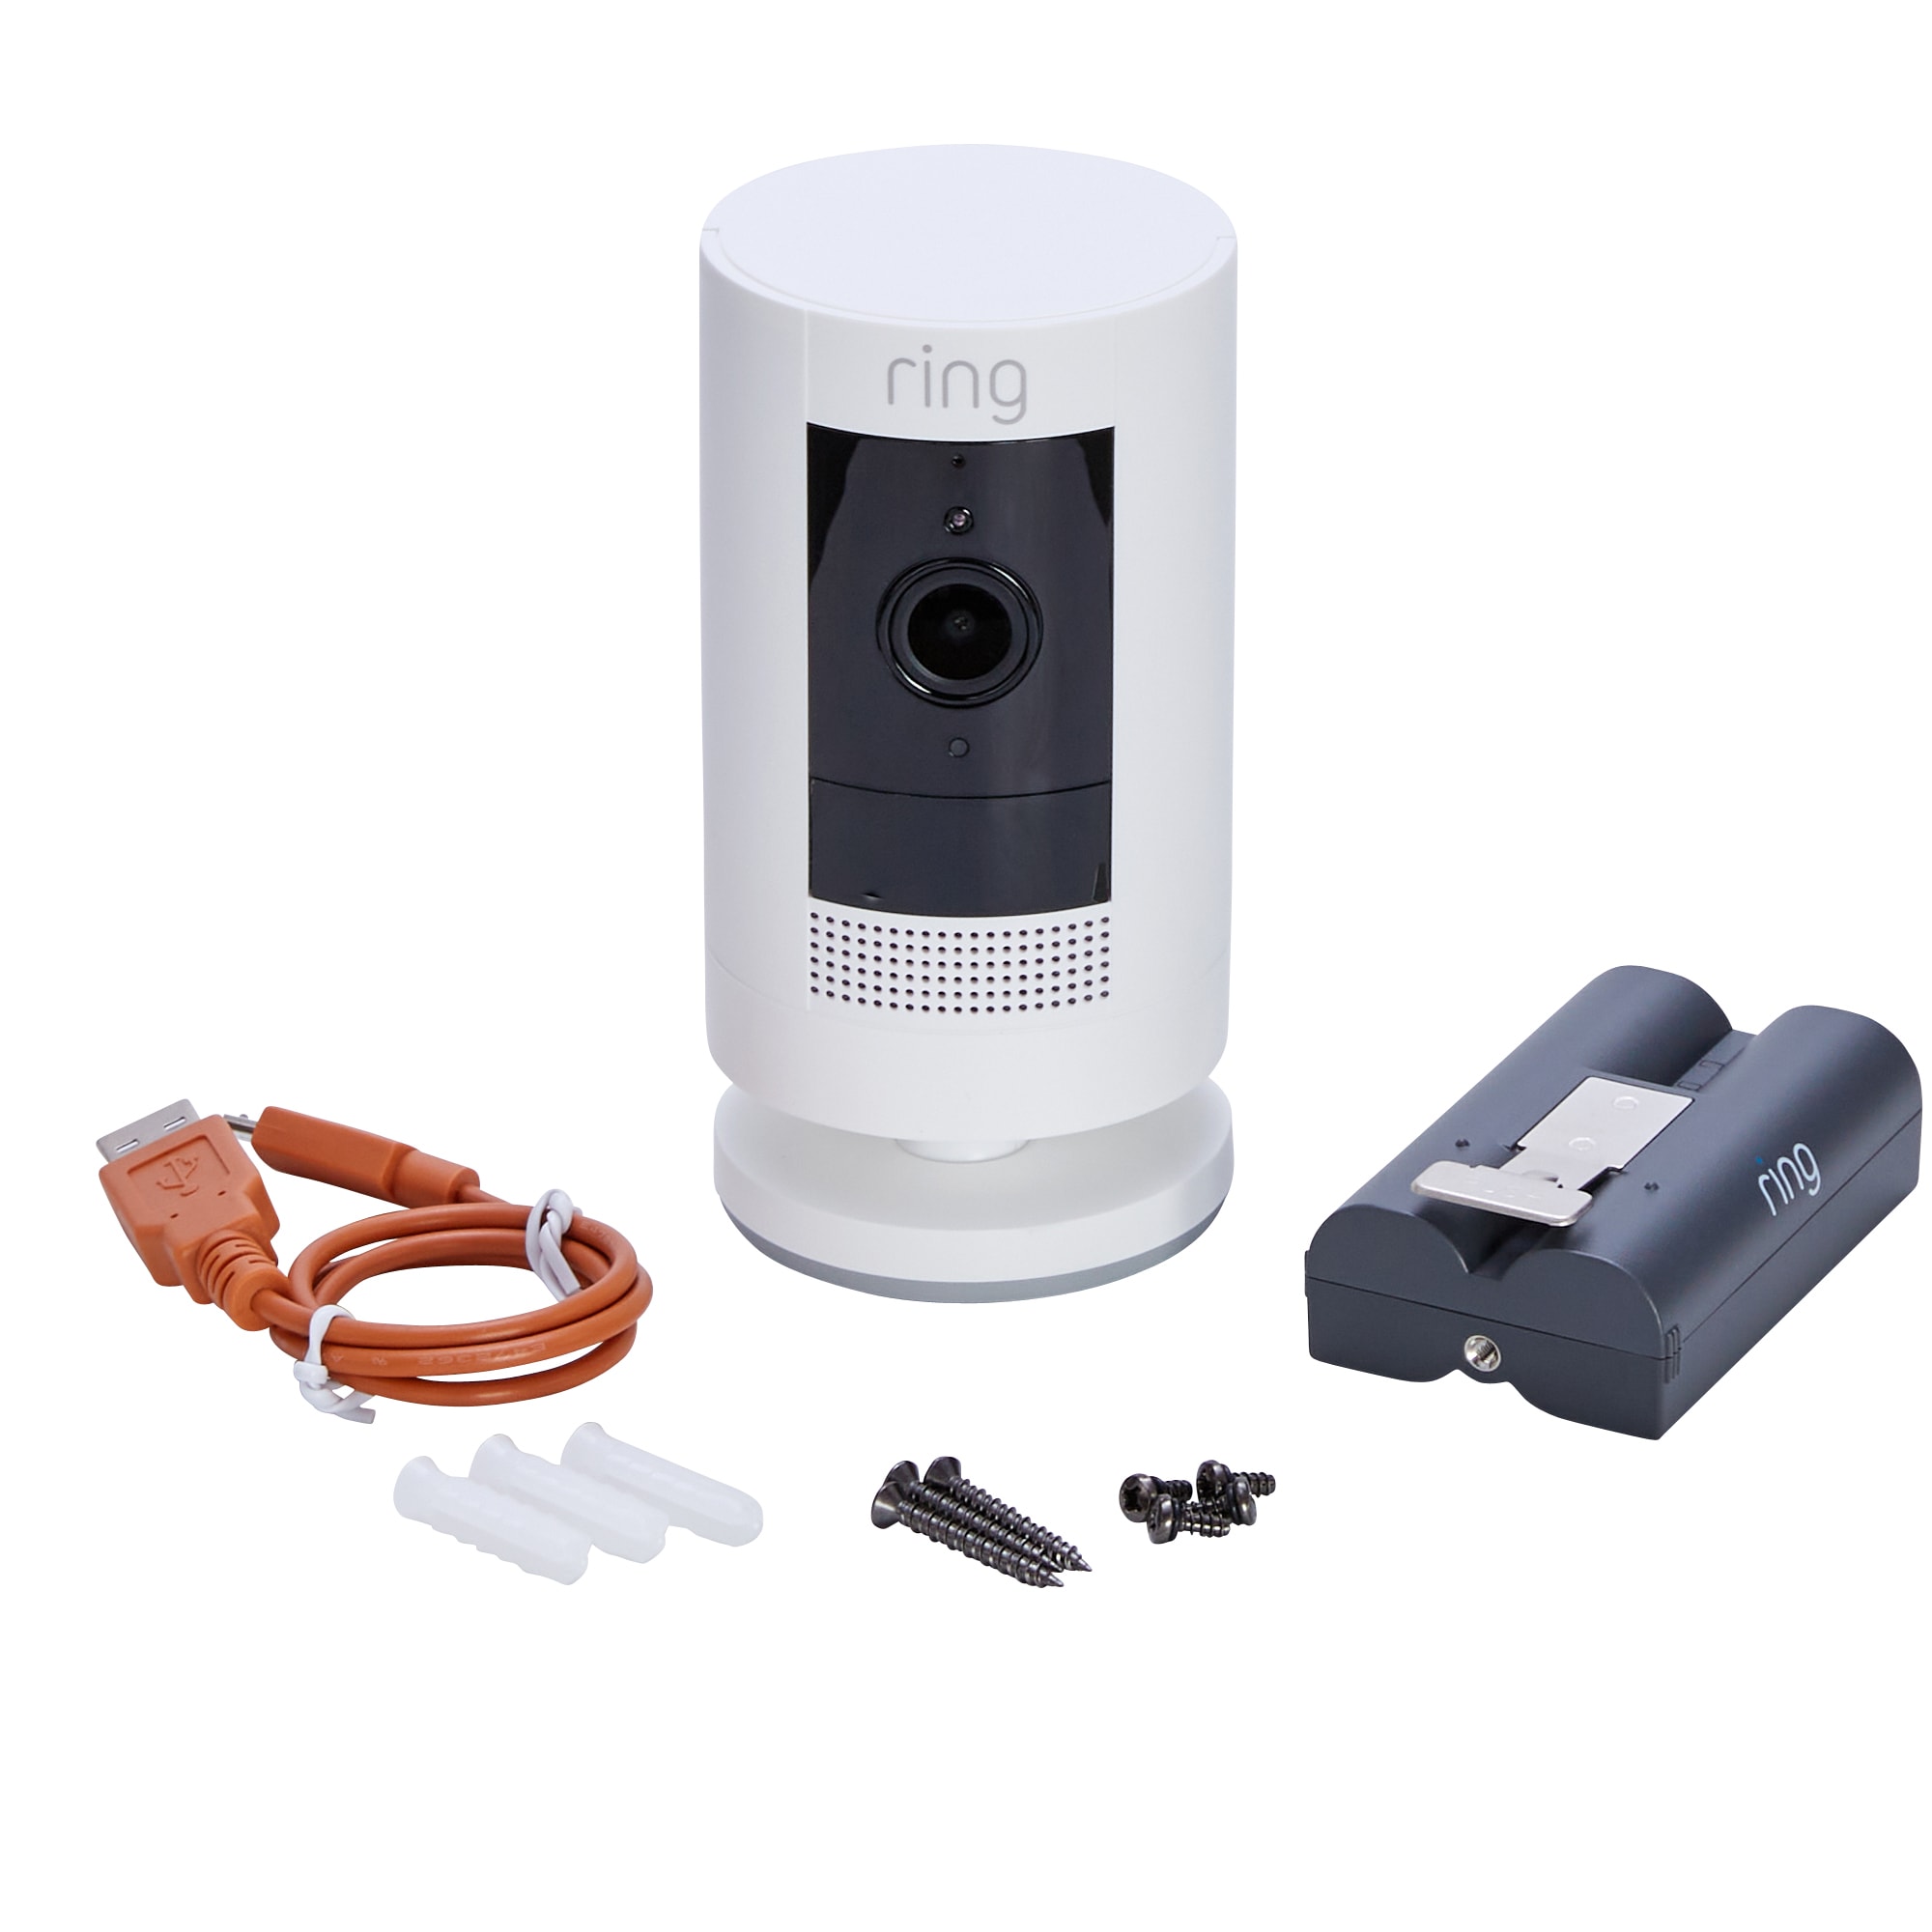 Ring Stick Up Cam review: Ring's solar-powered security camera